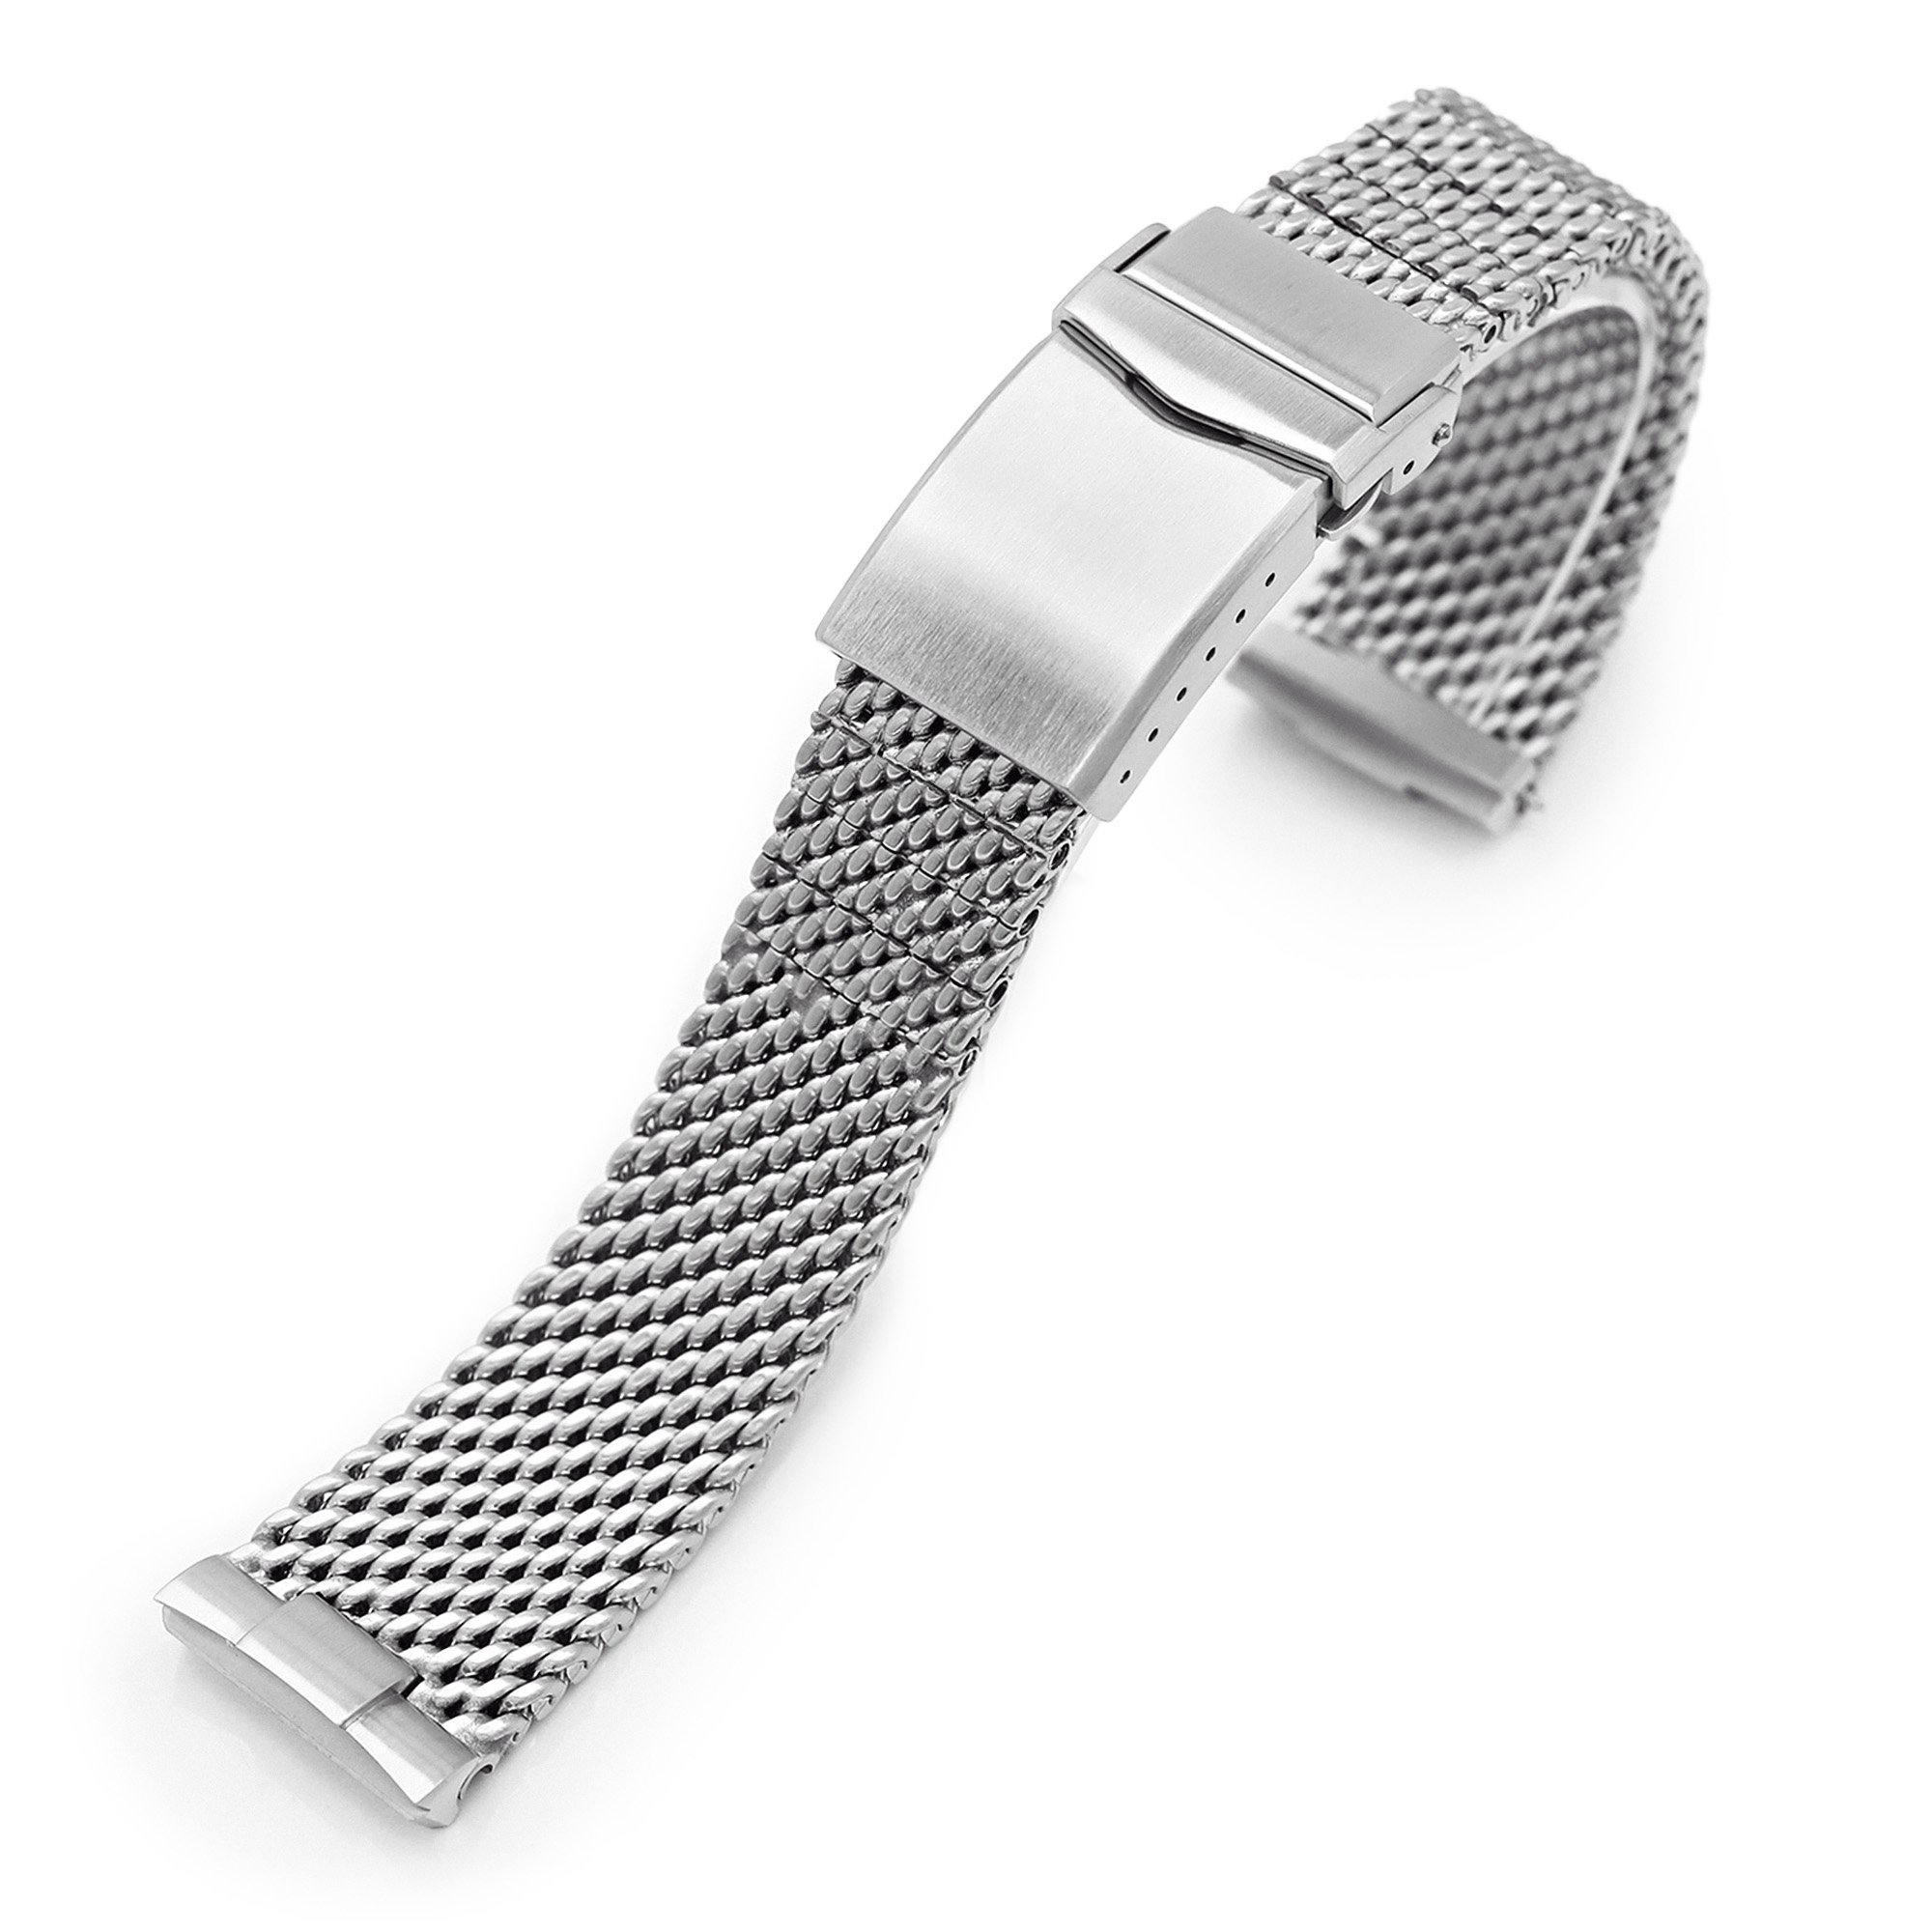 22mm Stainless Steel Watch band Bracelet For Seiko Turtles SRP777 SRP779  SRPA21